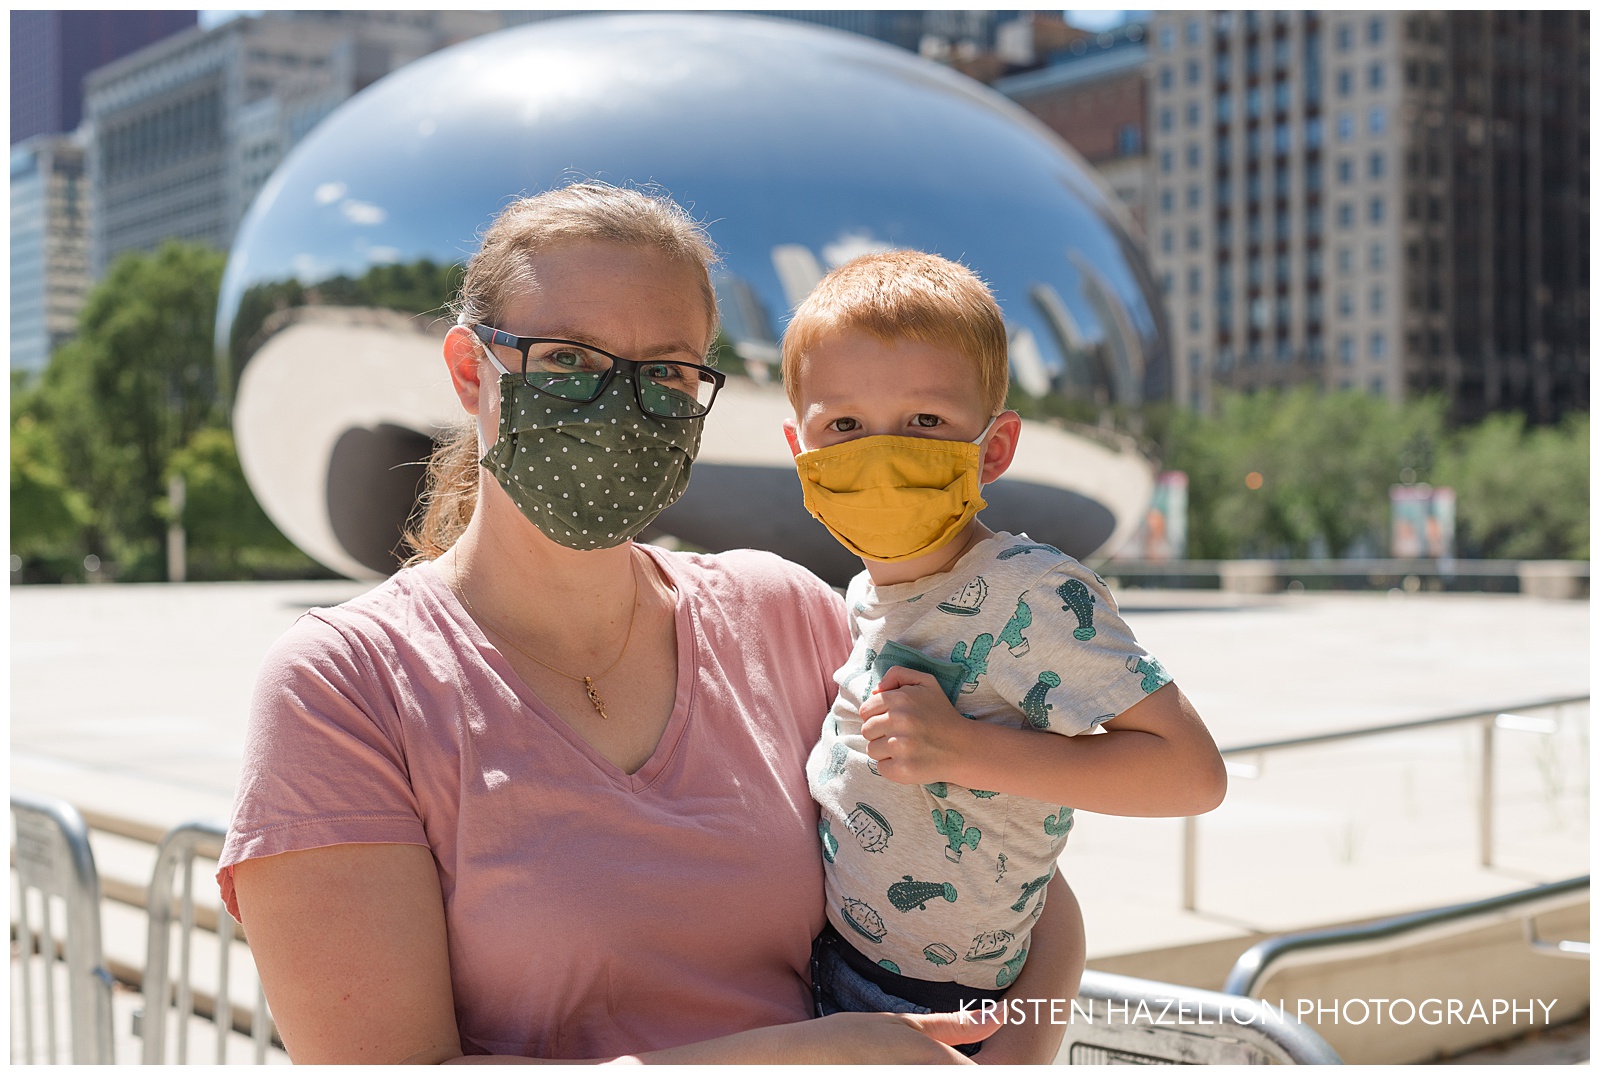 Mother and son wearing surgical masks at the Chicago Cloud Gate "Bean"